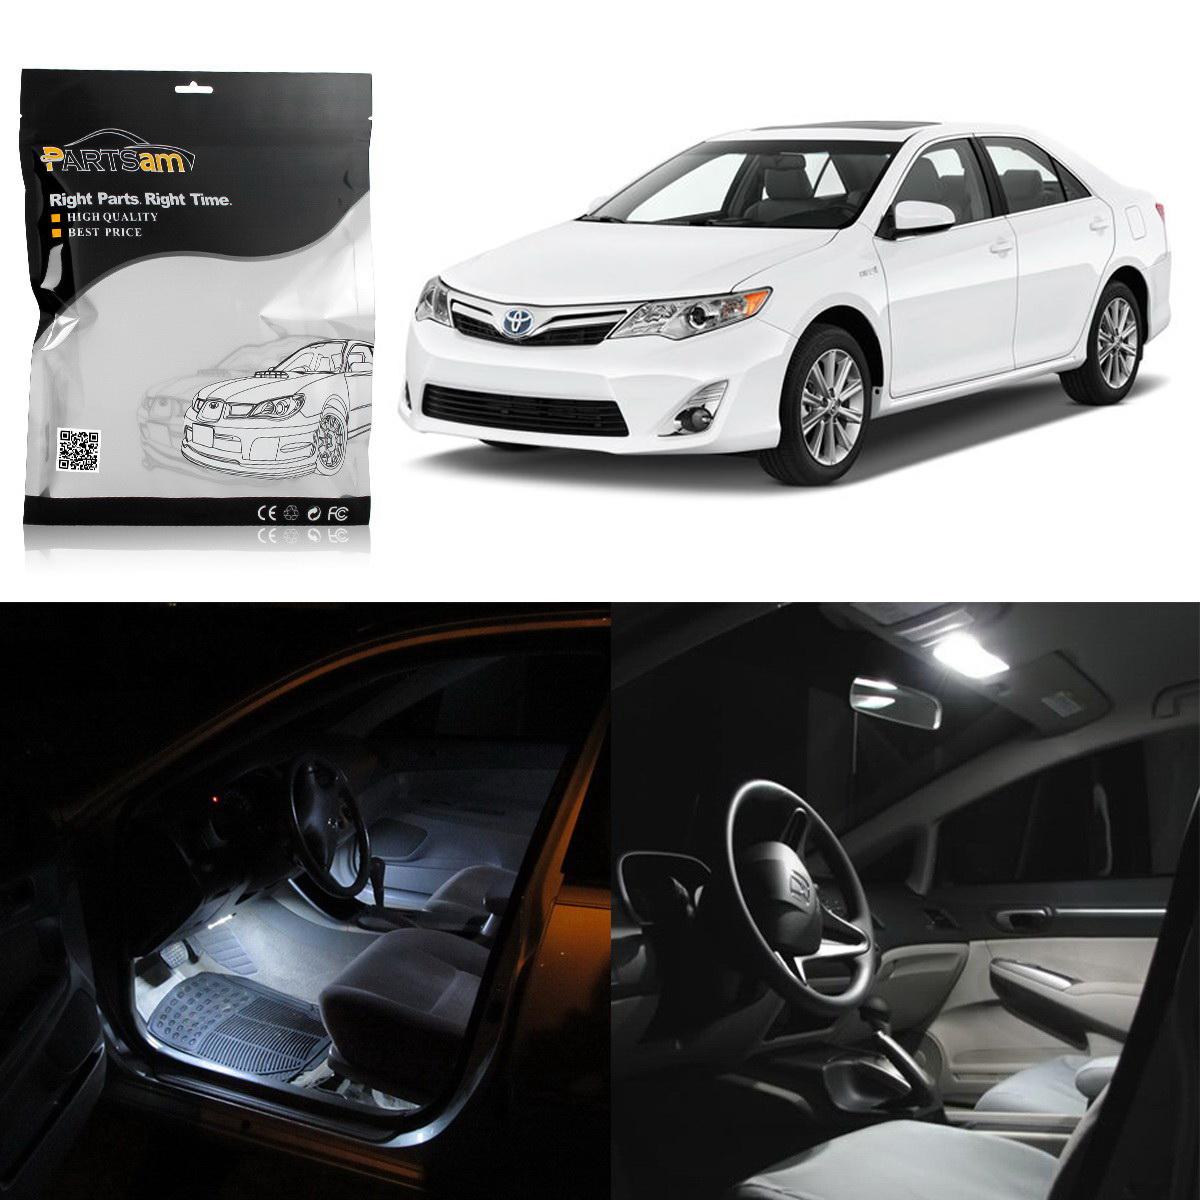 Details About 8x For Toyota Camry 2012 2013 2014 Interior White Led Lights Combo W O Sunroof